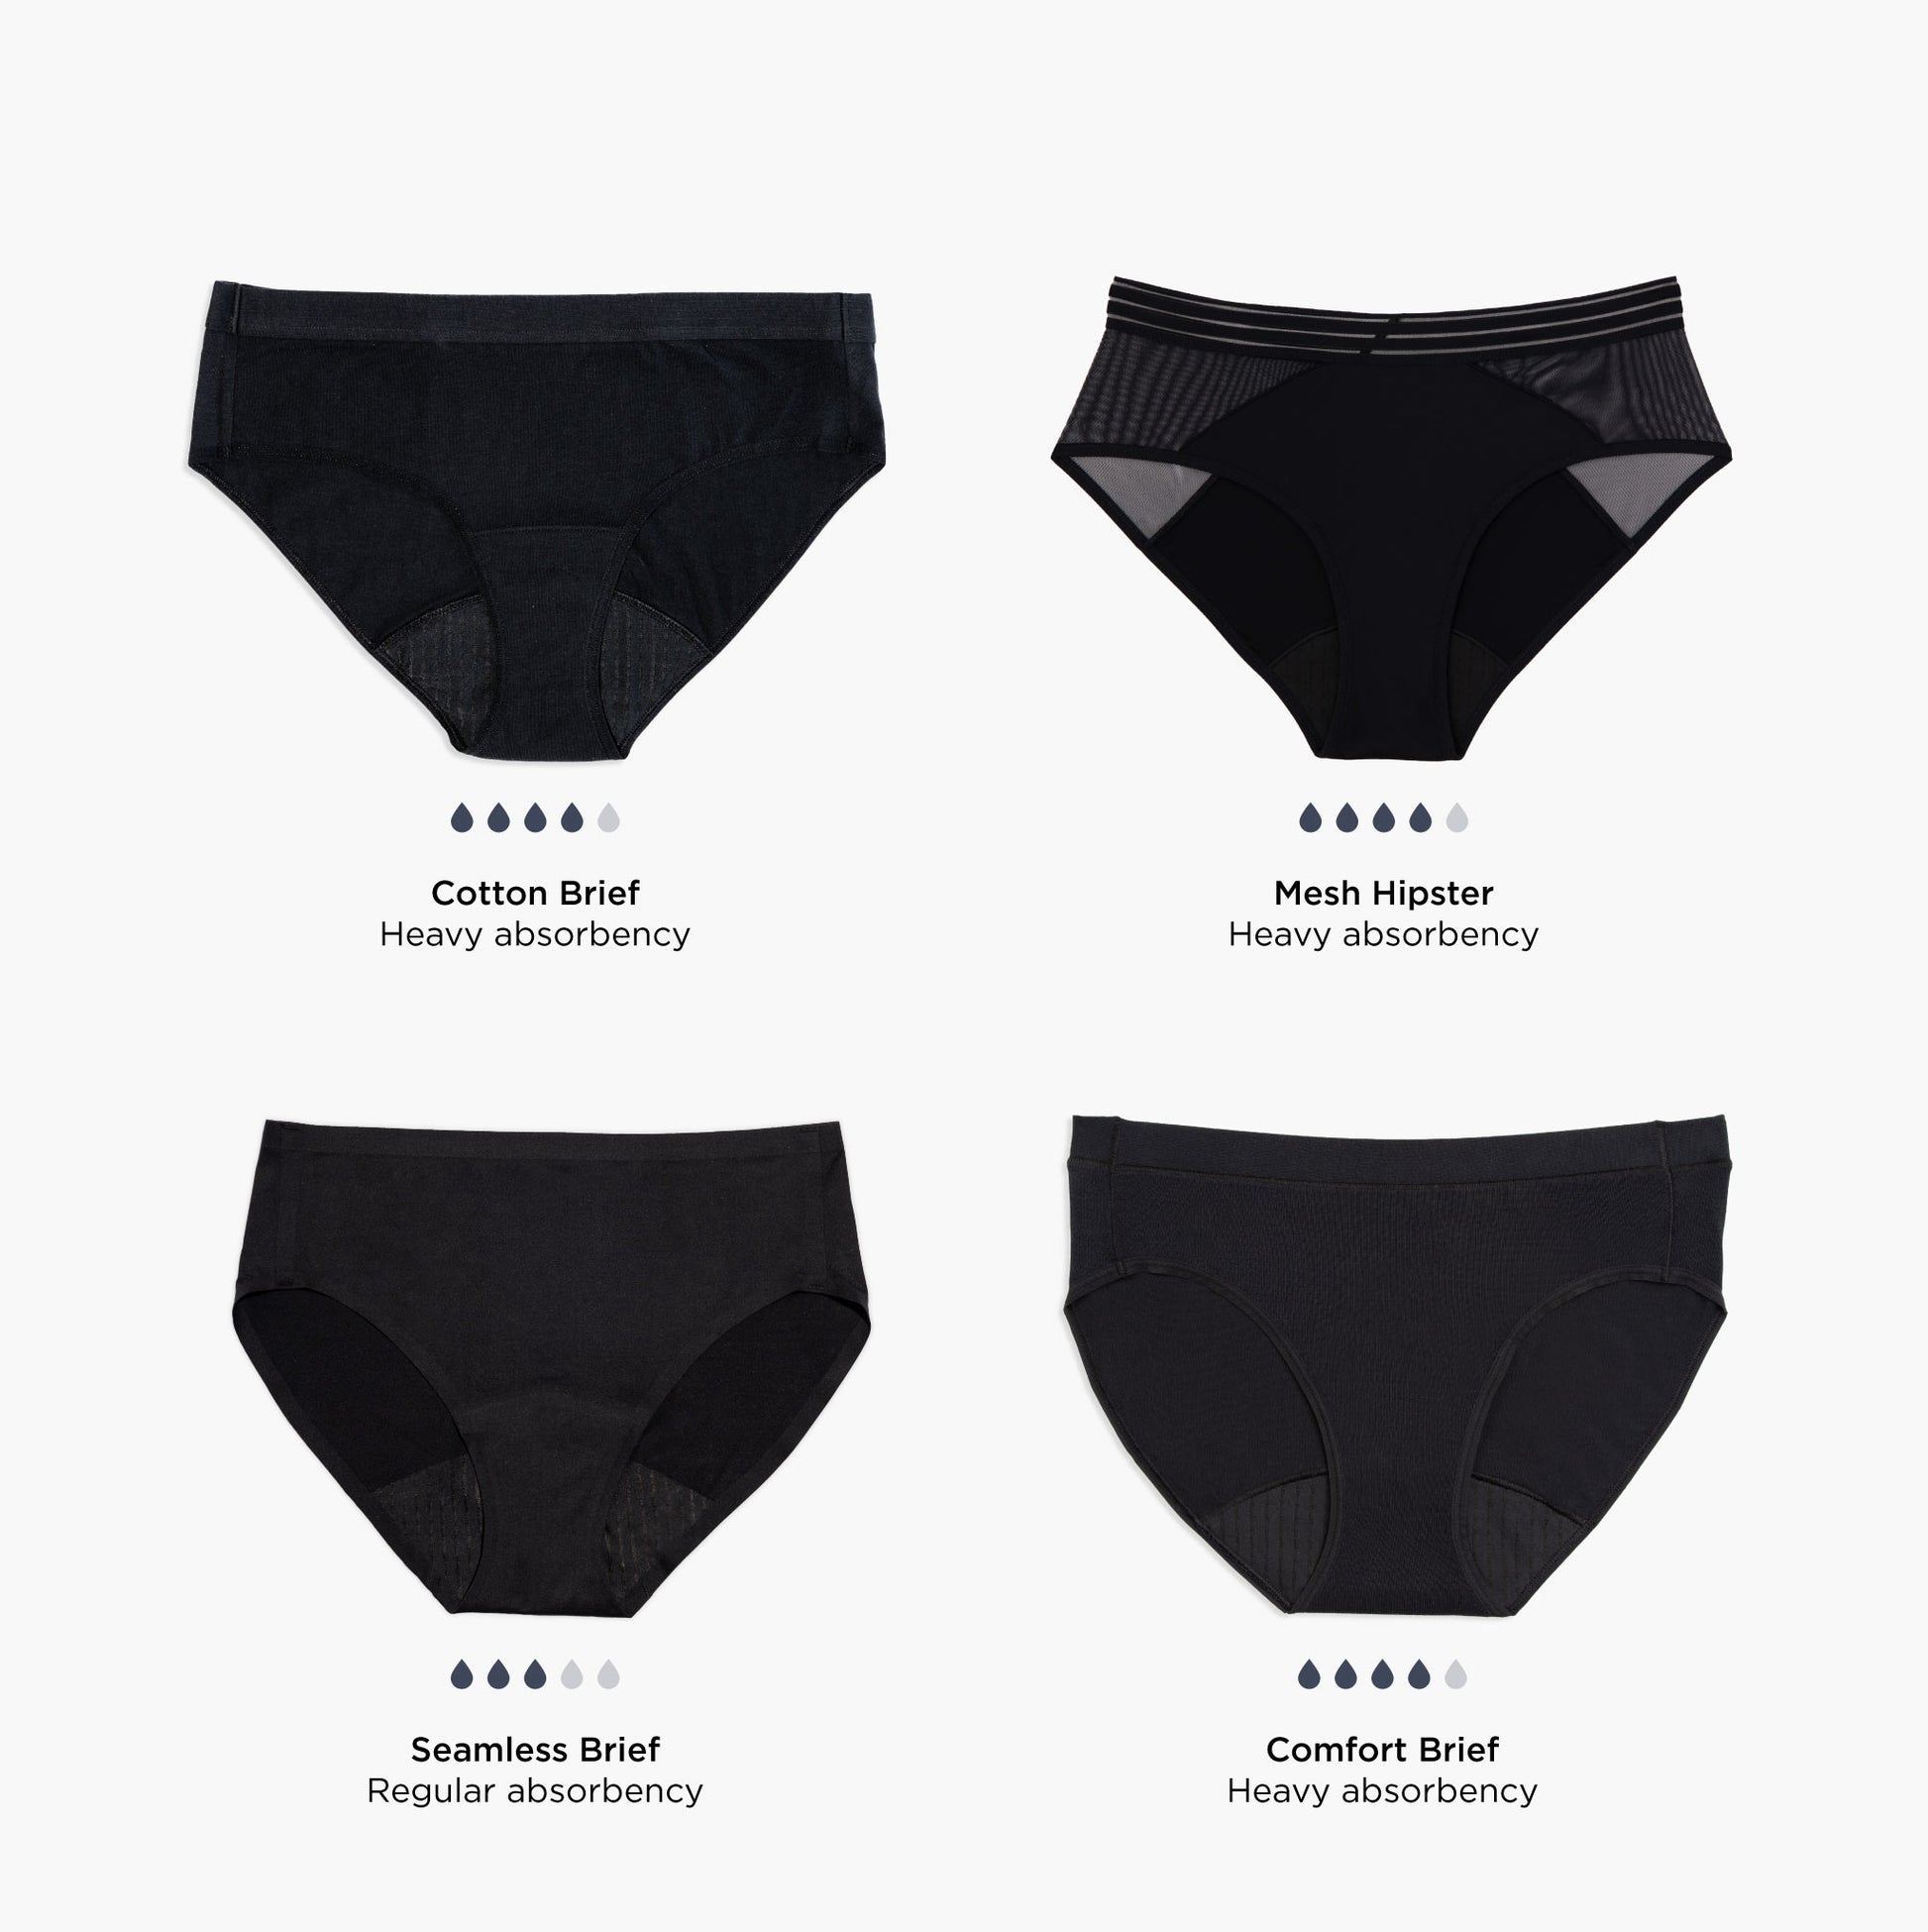 Best period underwear list: All your questions about period